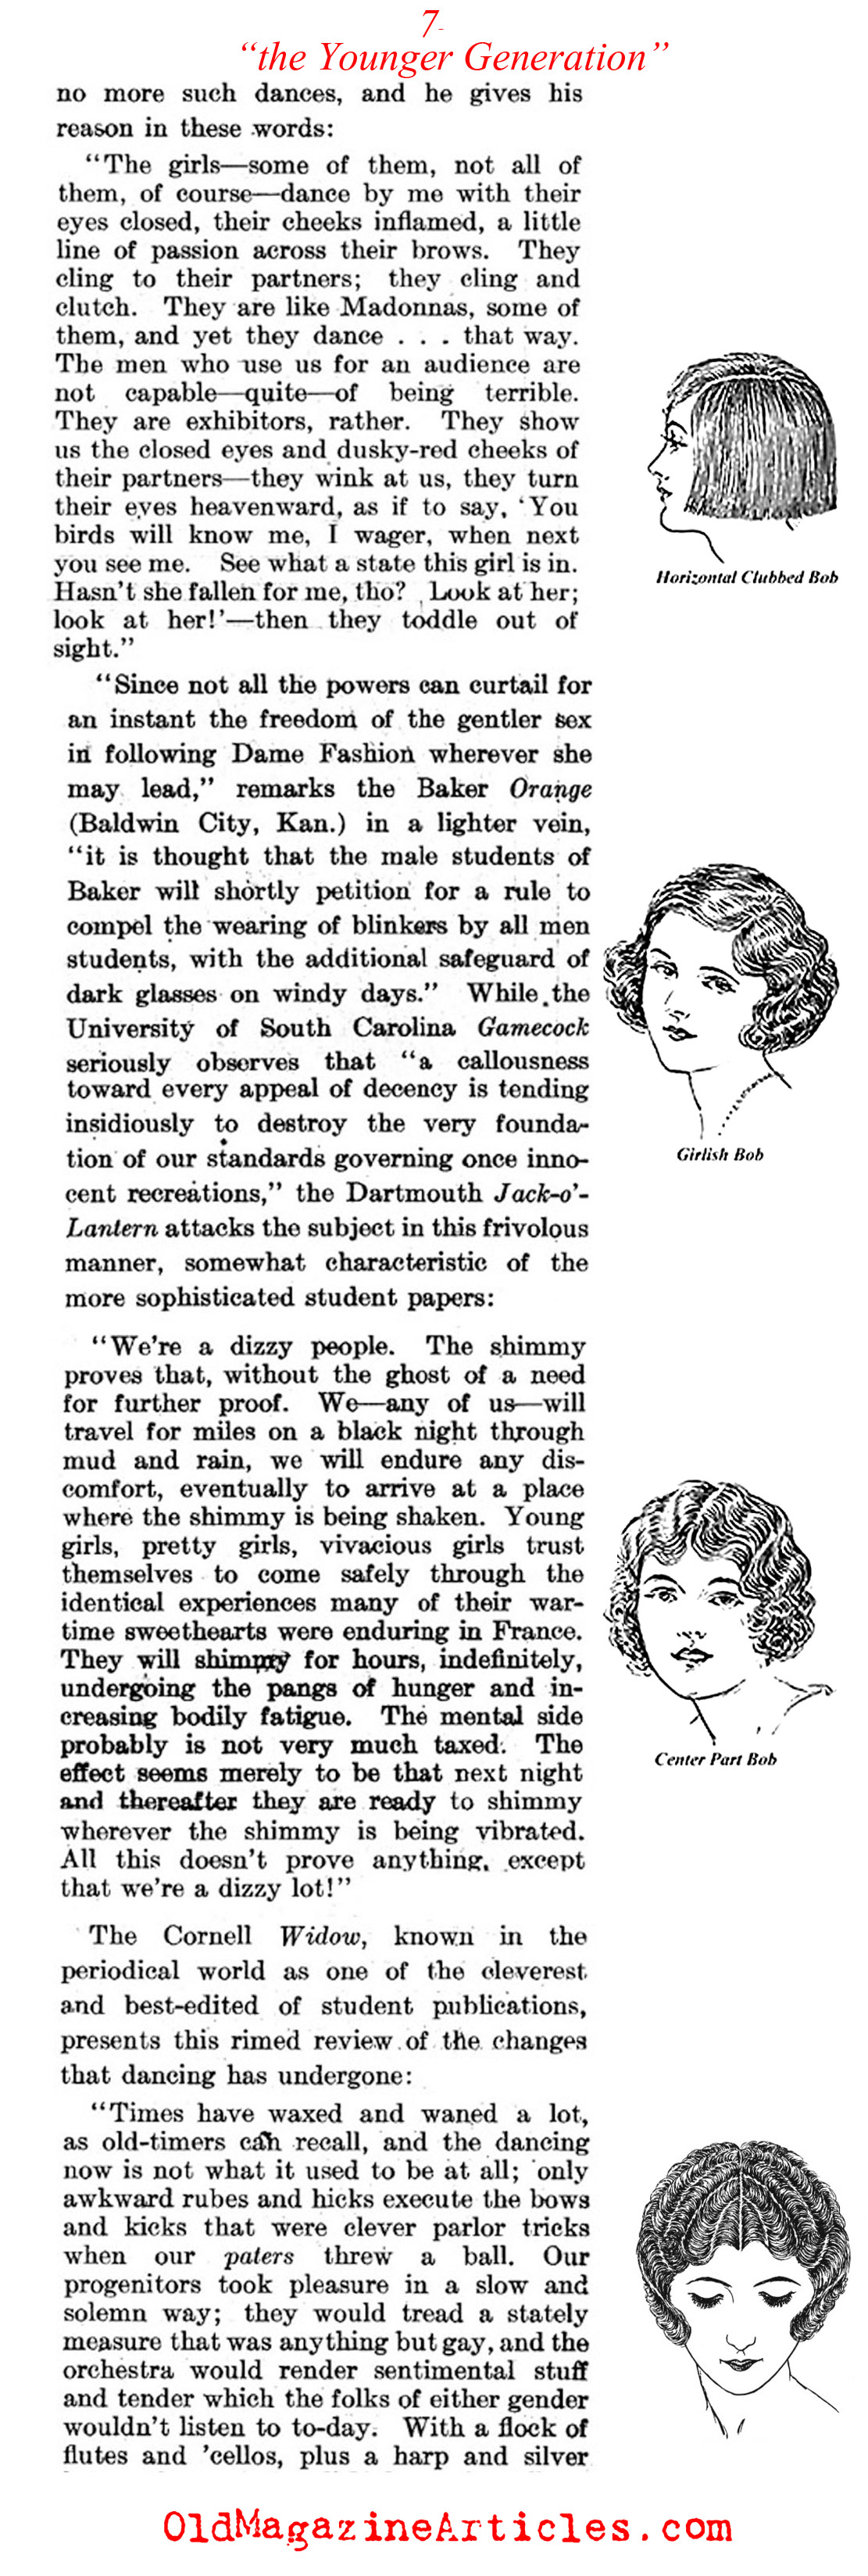 ''Is the Younger Generation in Peril?'' (Literary Digest, 1921)